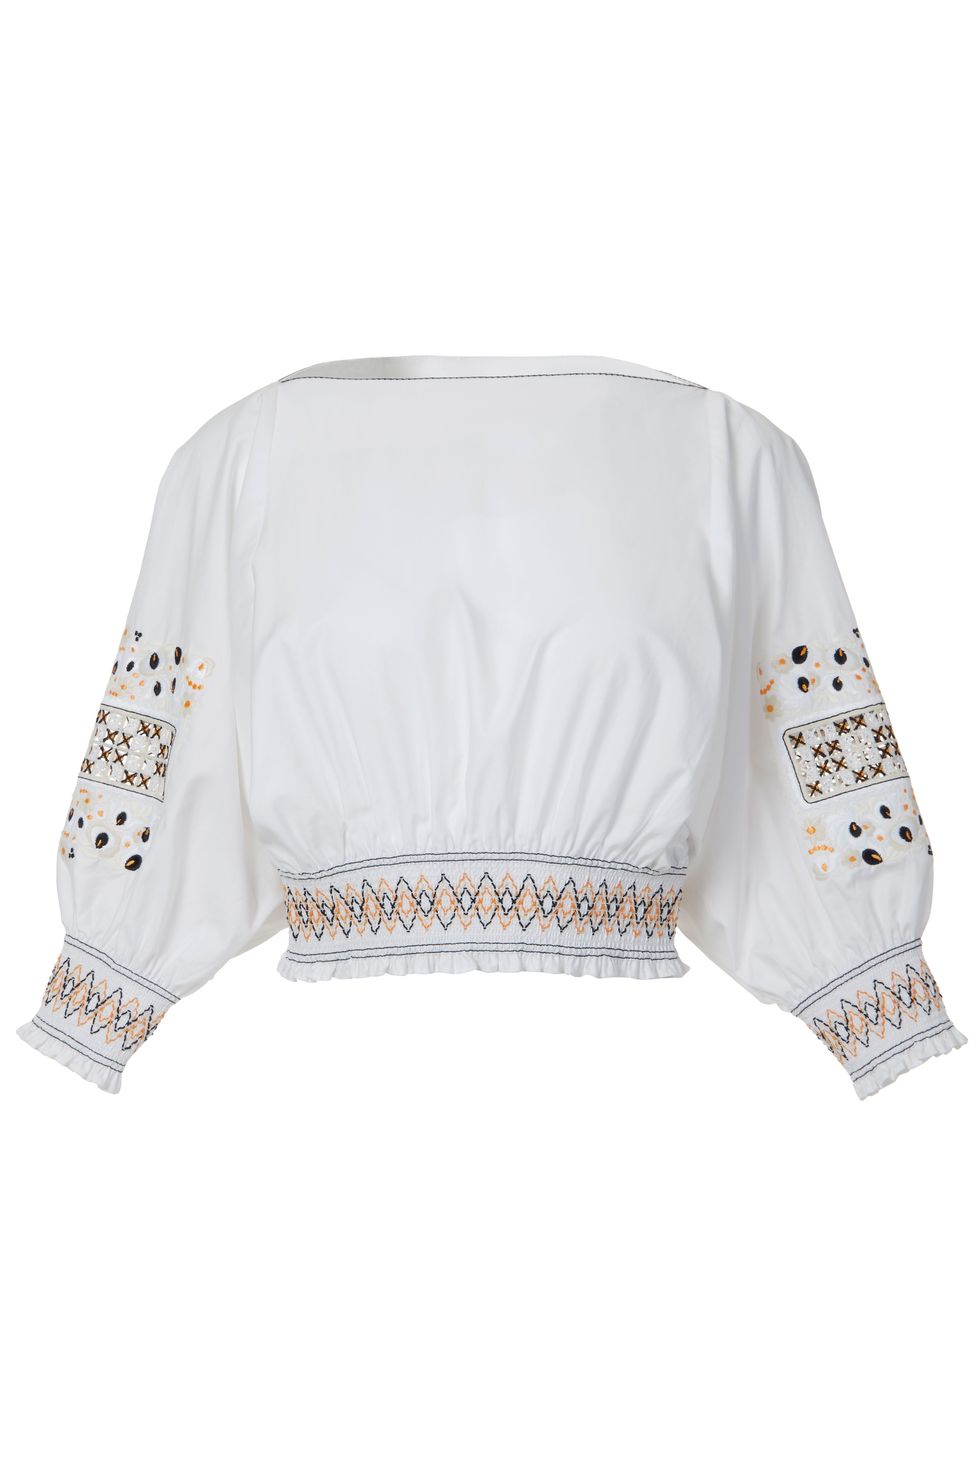 <p>Embroidery makes a laid-back shape feel more special than a basic cover-up.</p><p><em data-redactor-tag="em" data-verified="redactor">Tibi Embroidered Crop Top $375; </em><a href="http://www.tibi.com/shop/features/the-vacation-edit/cora-embroidery-cropped-top" target="_blank" data-tracking-id="recirc-text-link"><em data-redactor-tag="em" data-verified="redactor">tibi.com</em></a></p>